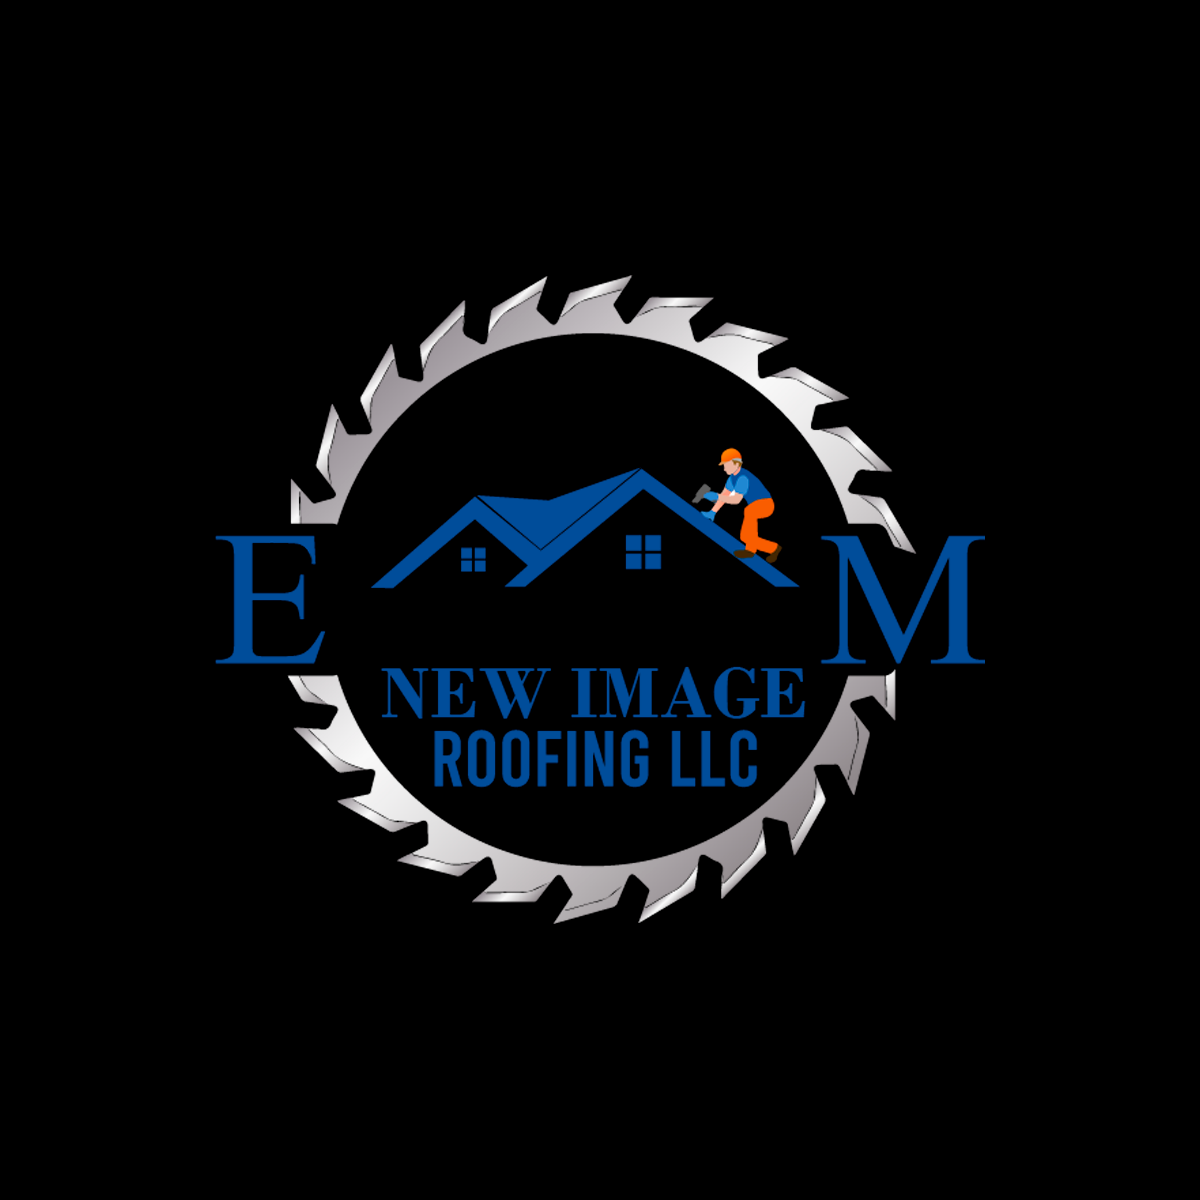 New Image Roofing LLC